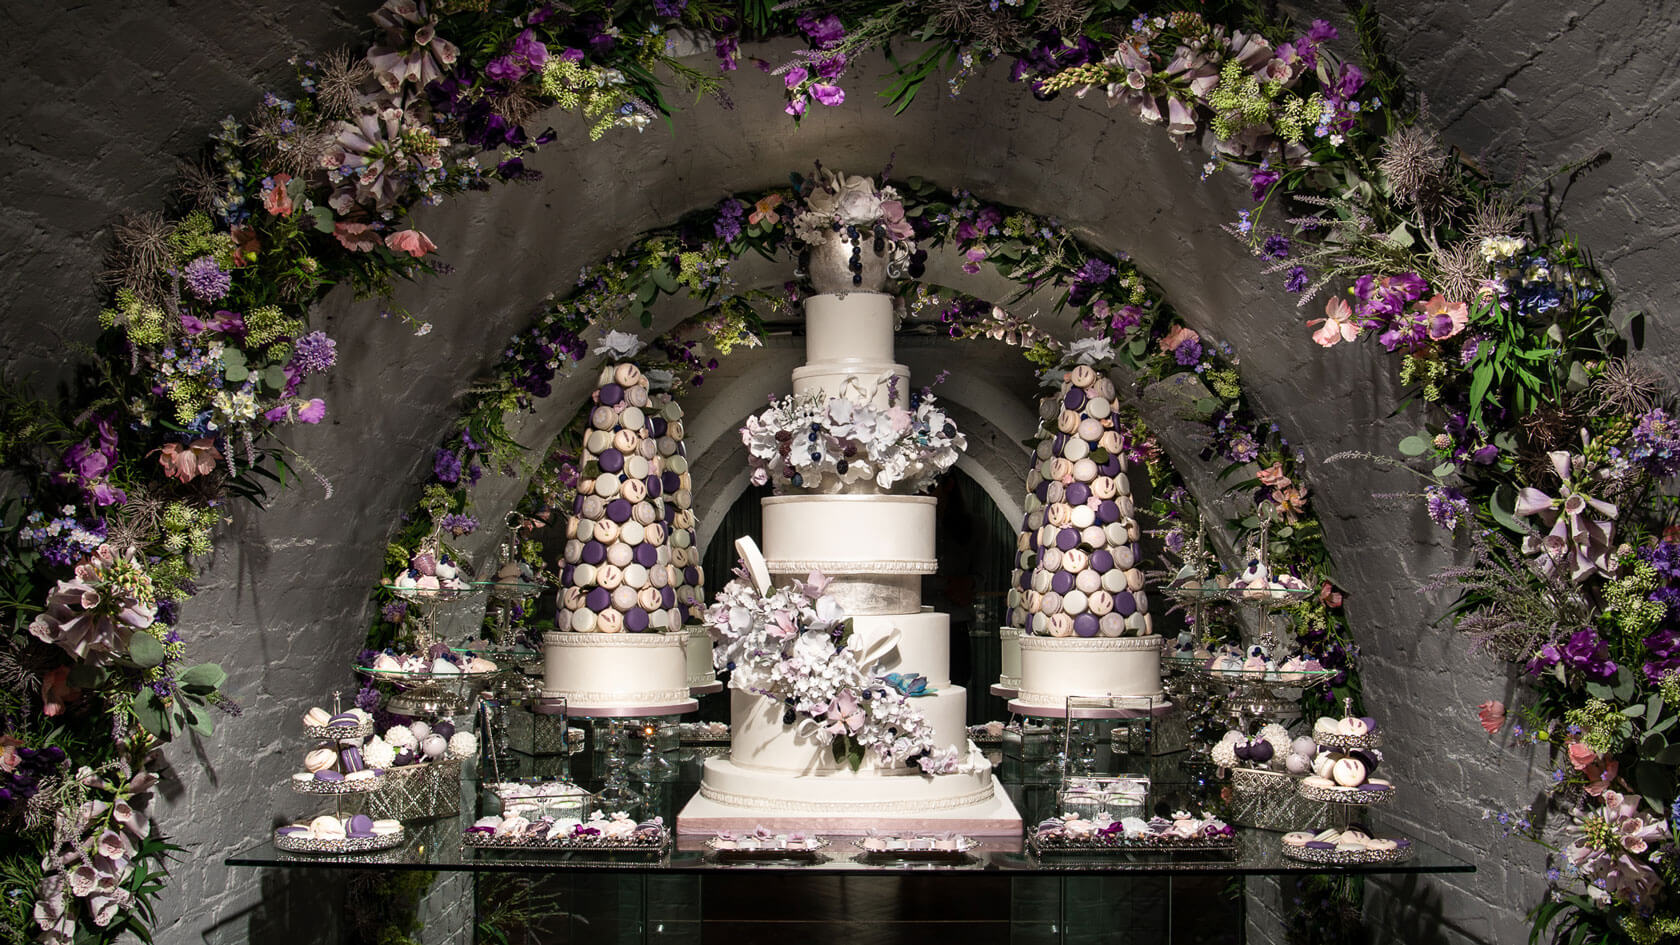 a bespoke luxury wedding cake surrounded by sweet treats and flowers in london